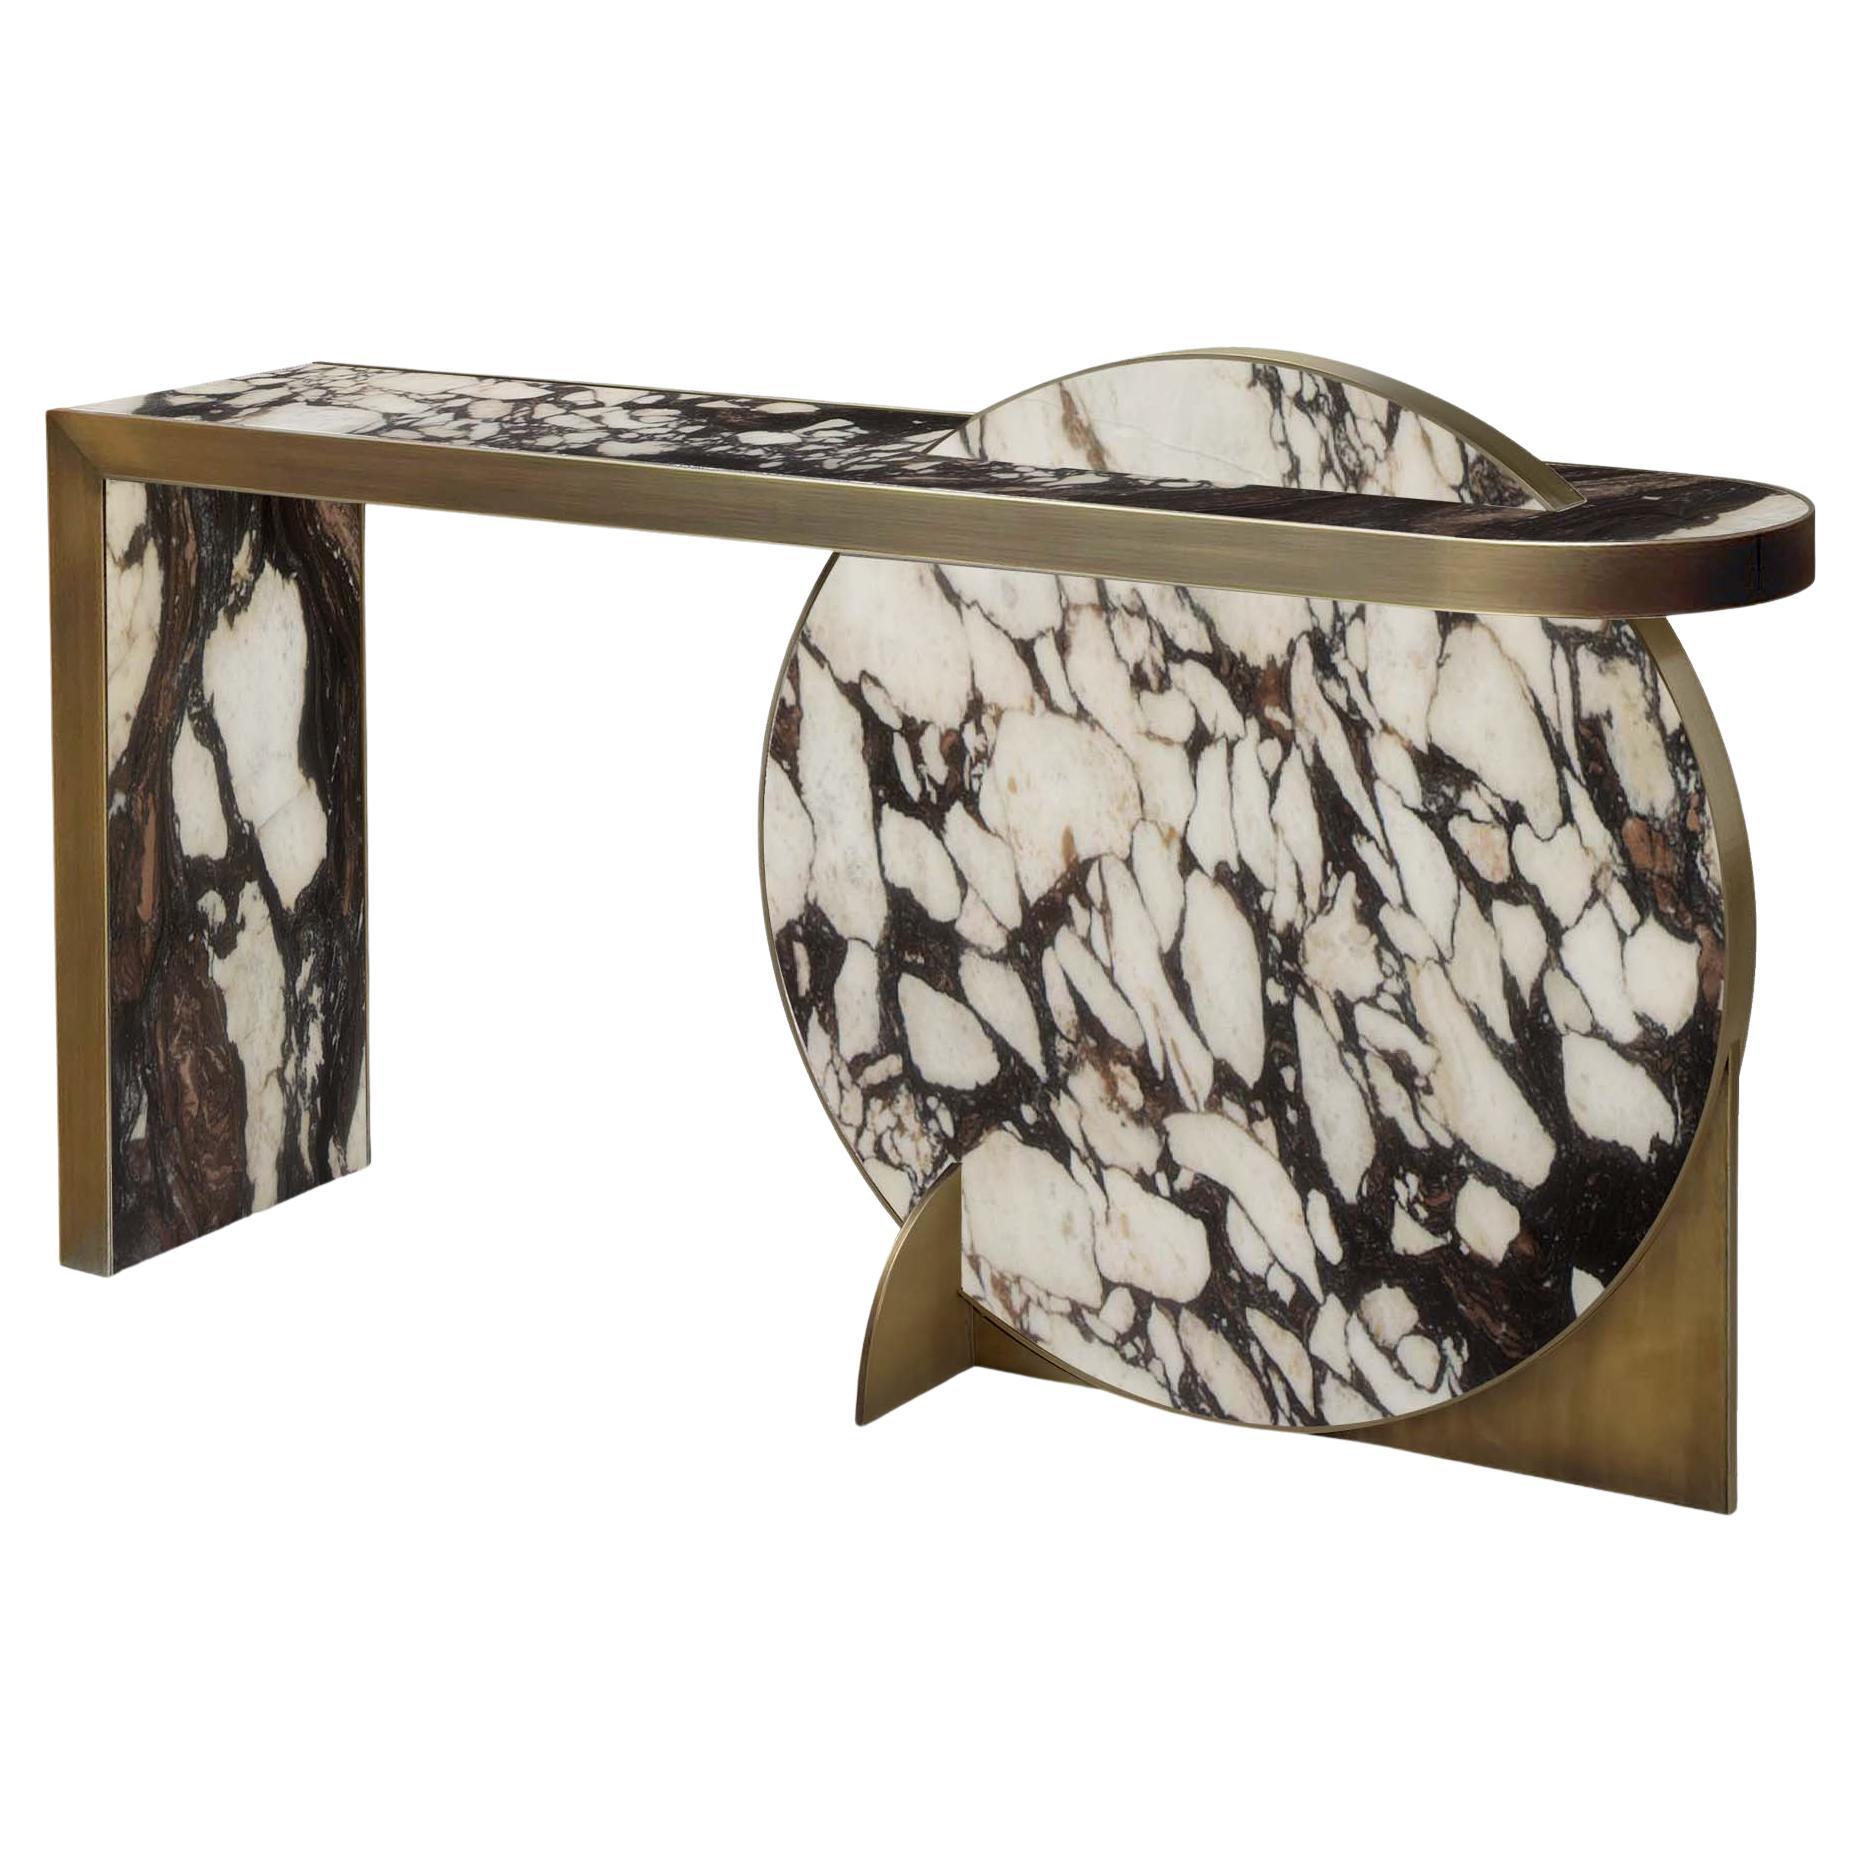 The Collision Console Carrara Marble and Brushed Brass, Viola, by Lara Bohinc For Sale